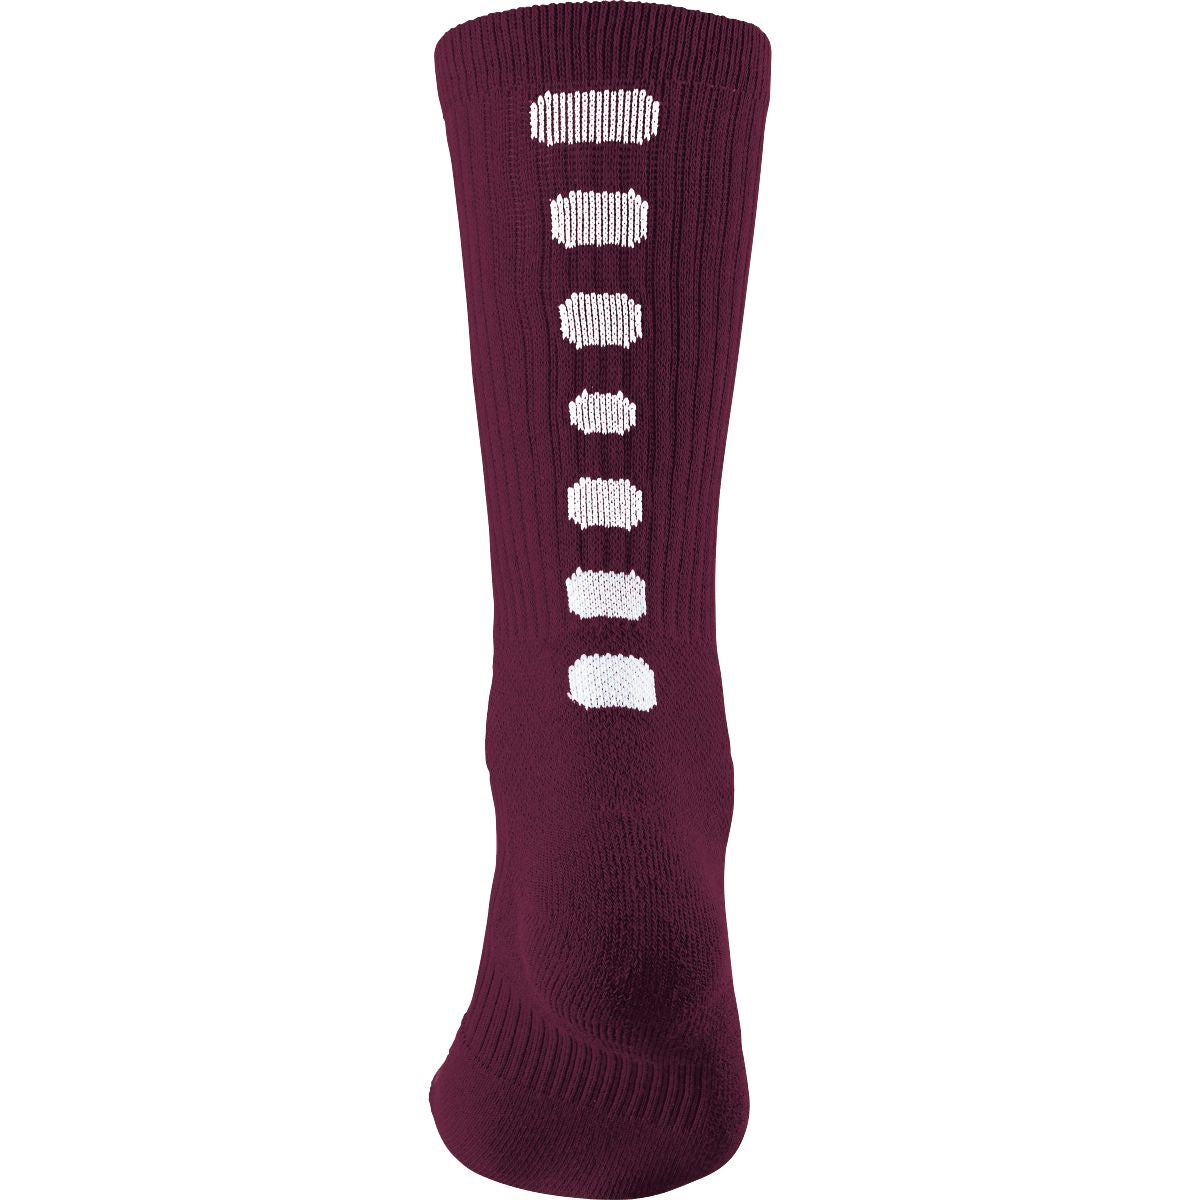 Augusta Sportswear Color Block Crew Sock in Maroon/White  -Part of the Adult, Augusta-Products, Accessories-Socks product lines at KanaleyCreations.com